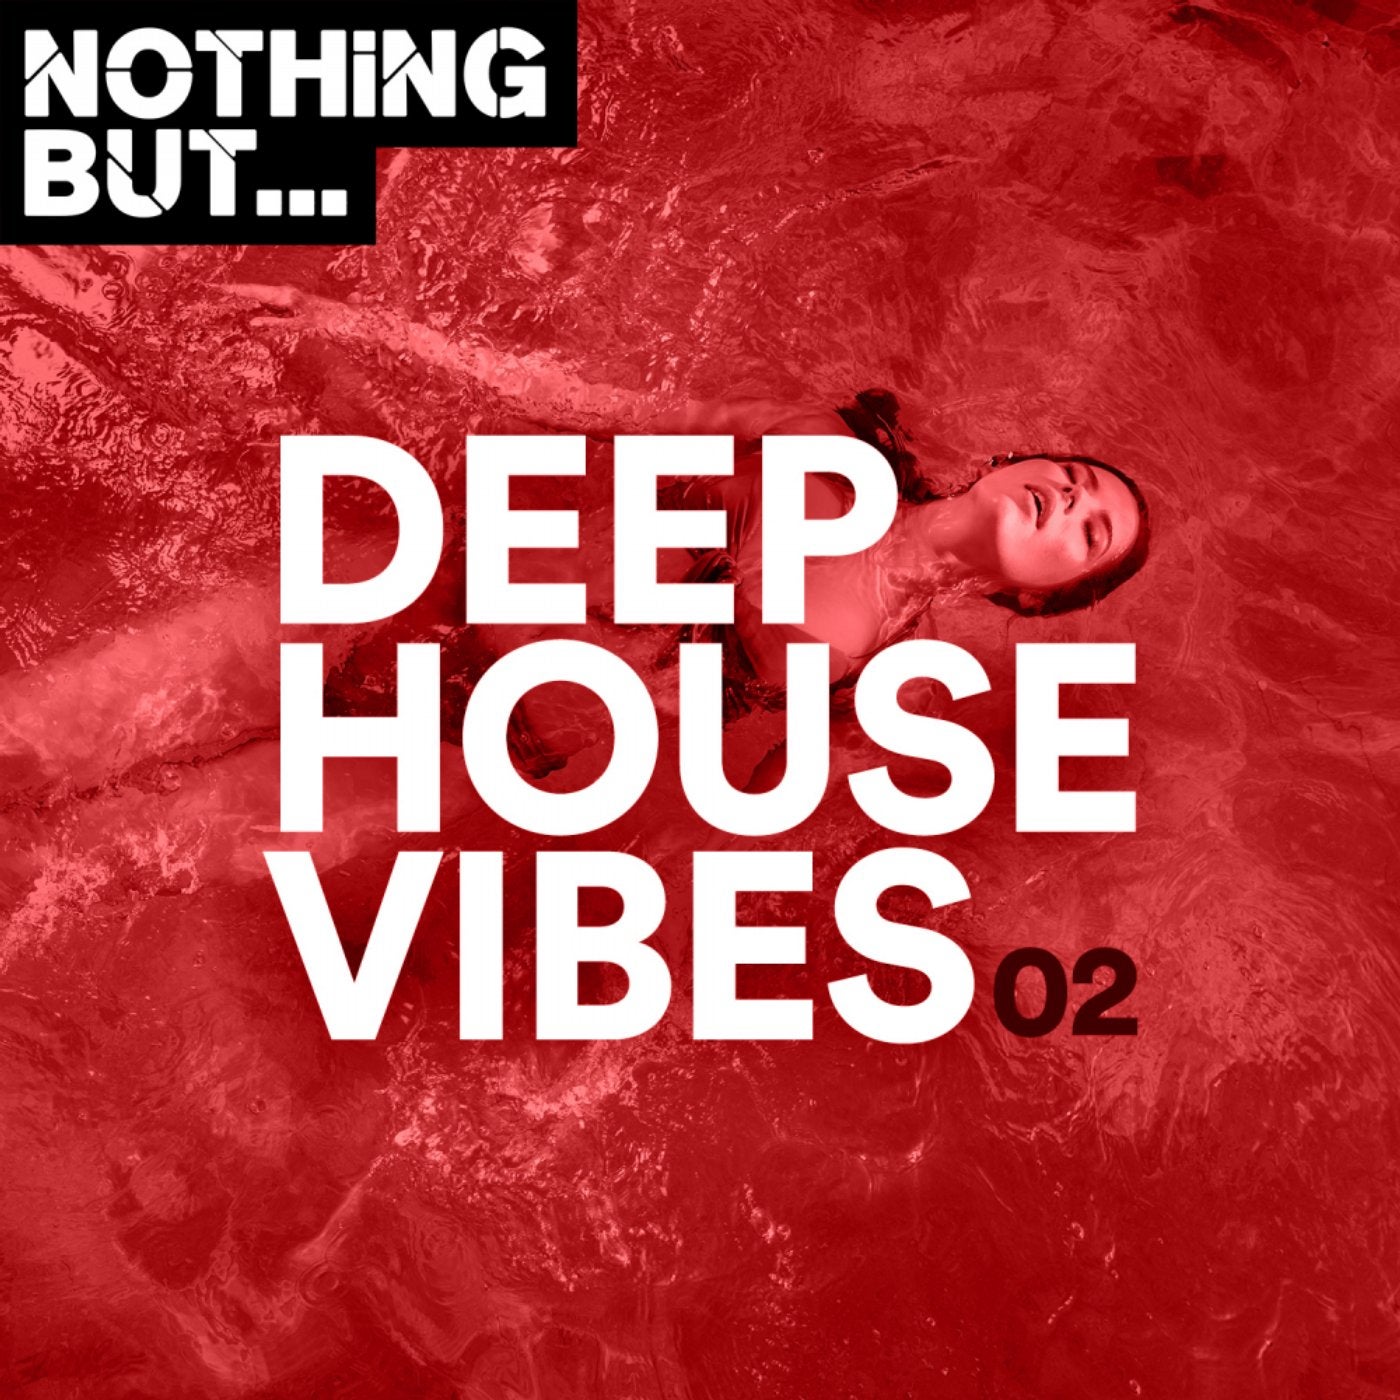 Nothing But... Deep House Vibes, Vol. 02